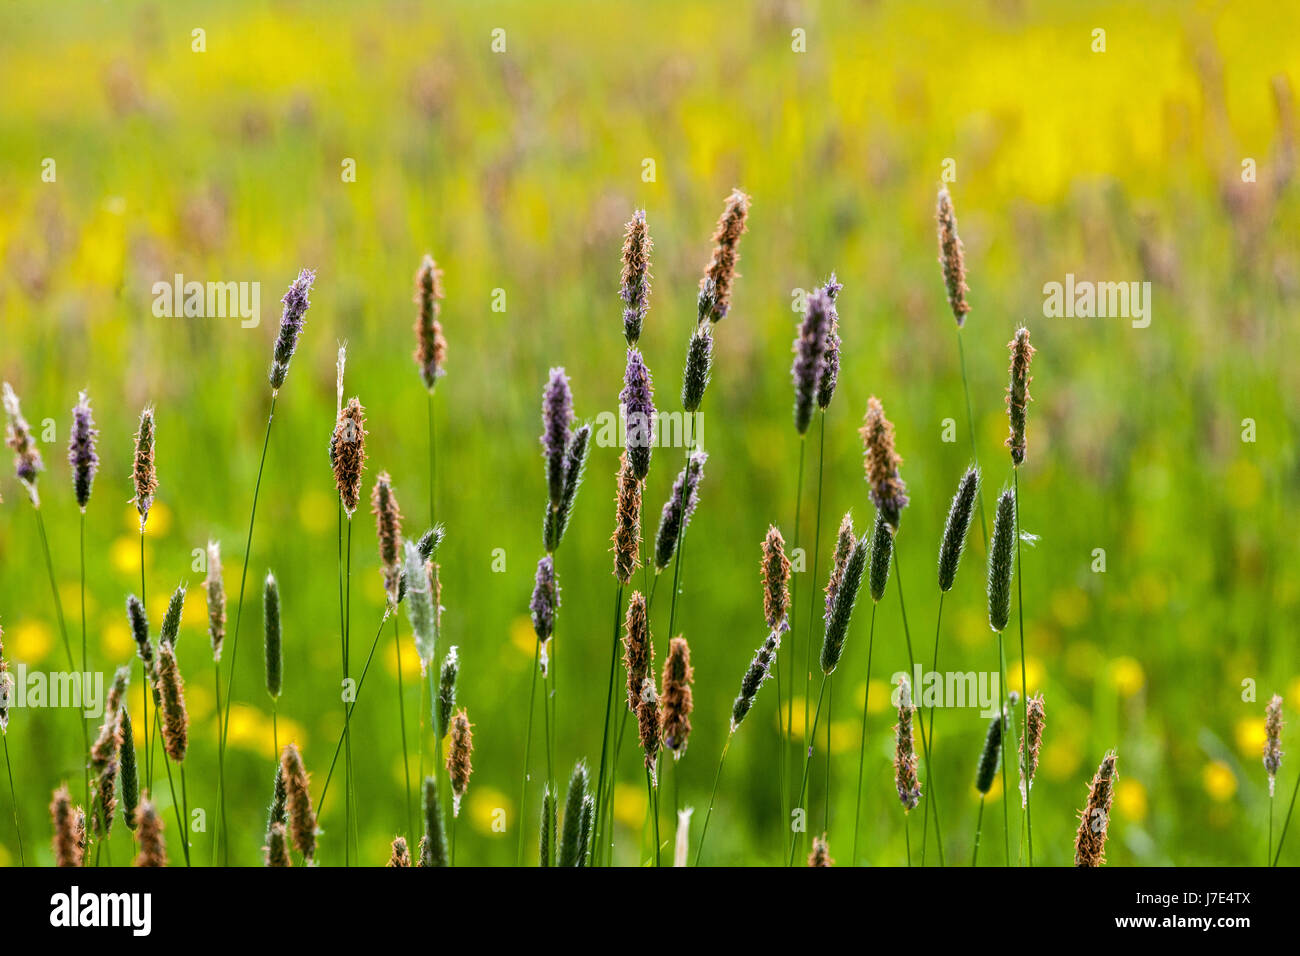 Meadow foxtail grass, Alopecurus pratensis, flowering in a colorful meadow perennial grasses Stock Photo